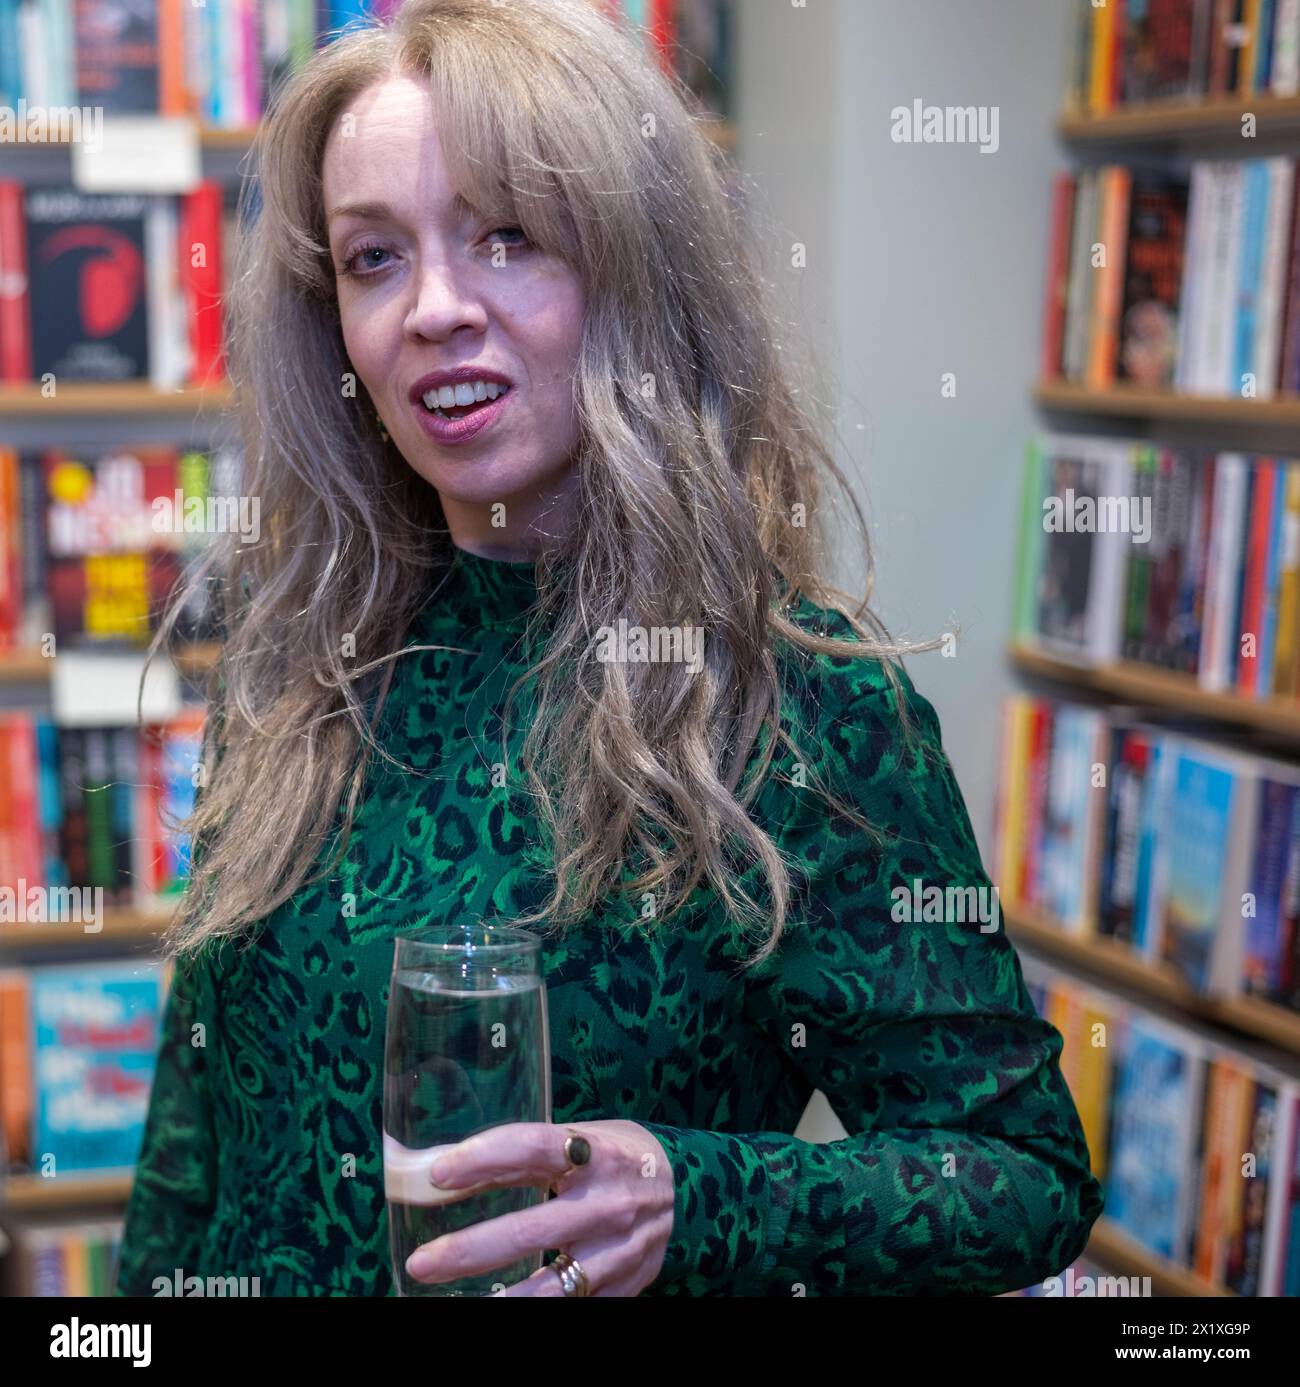 Brentwood Essex 16 Apr 2024 Erin Kelly, author of The Skeleton Key and her new book The House of Mirrors at a book signing at Waterstones Brentwood Essex UK Credit: Ian Davidson/Alamy Live News Stock Photo